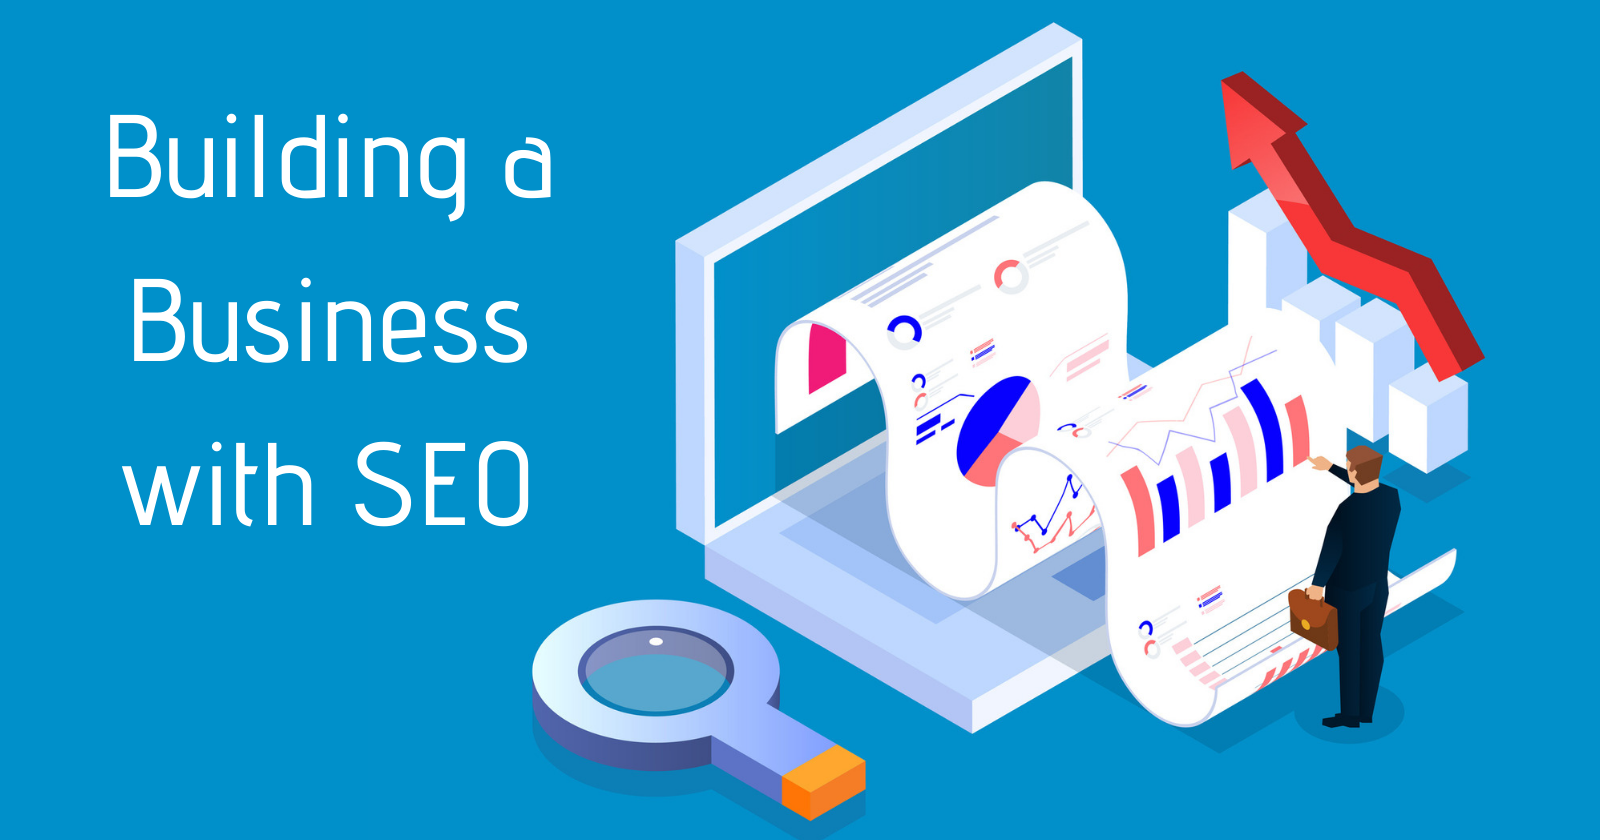 Building a Business with SEO